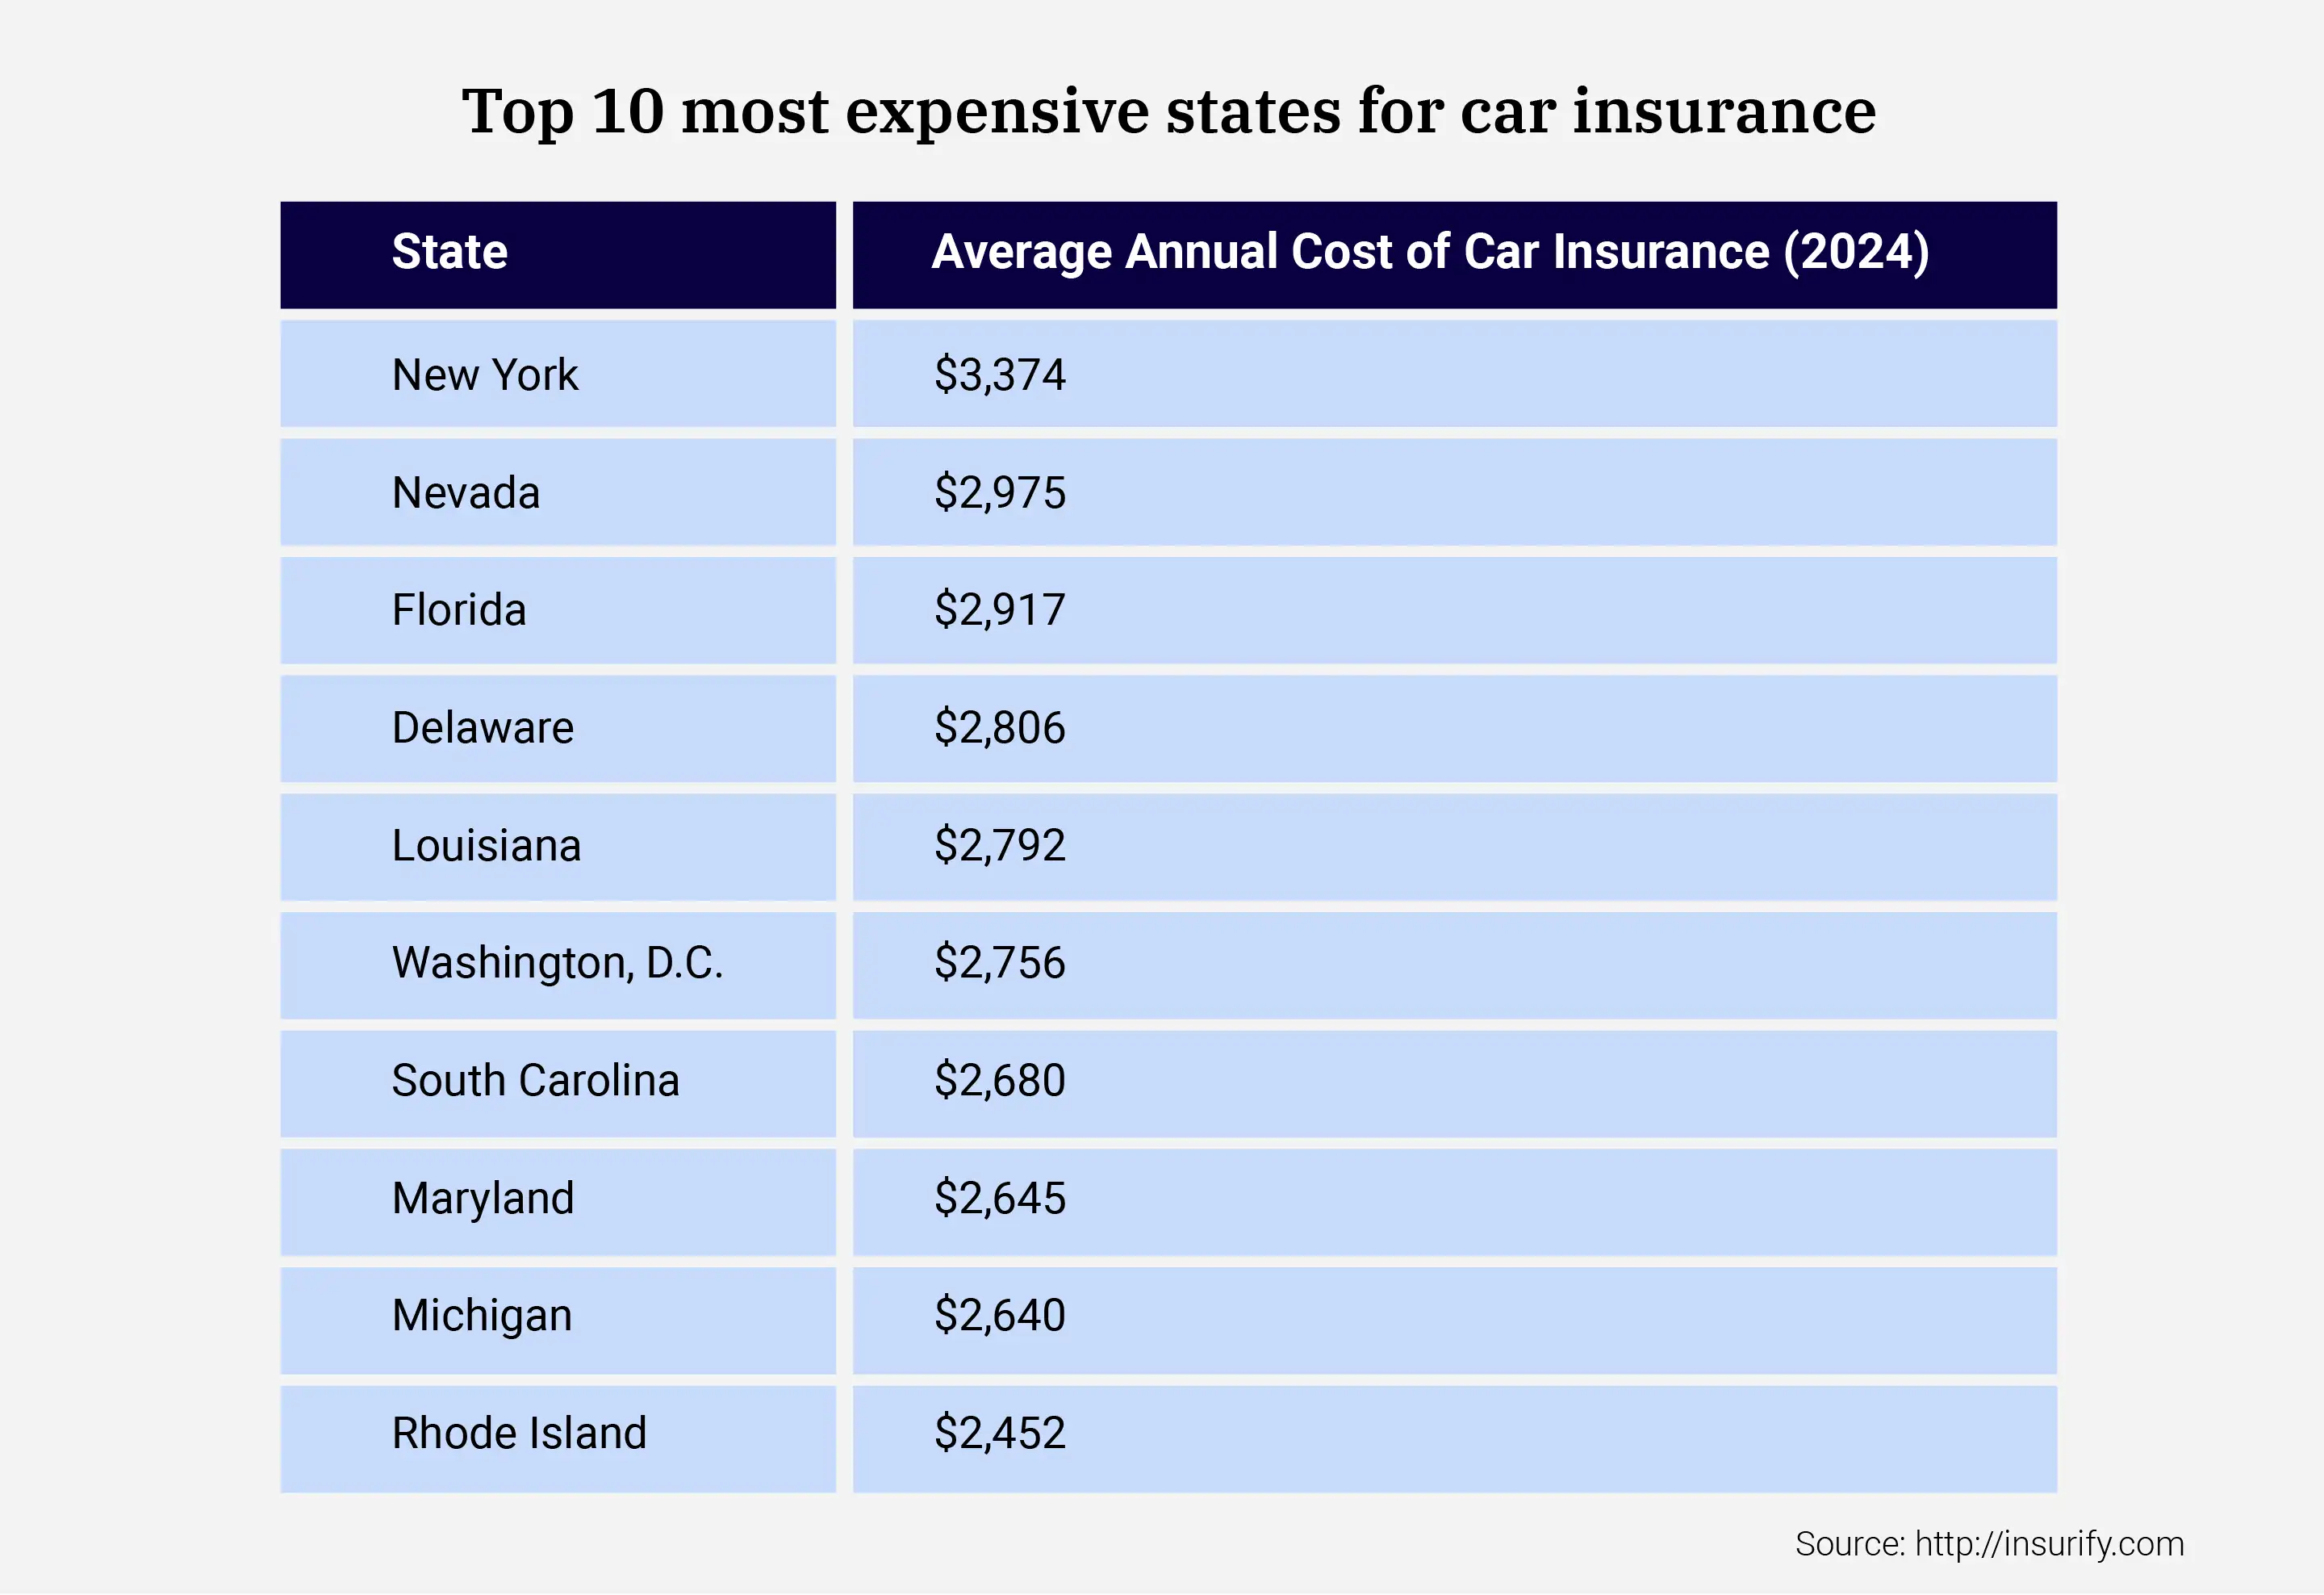 Top 10 expensive states for car insurance